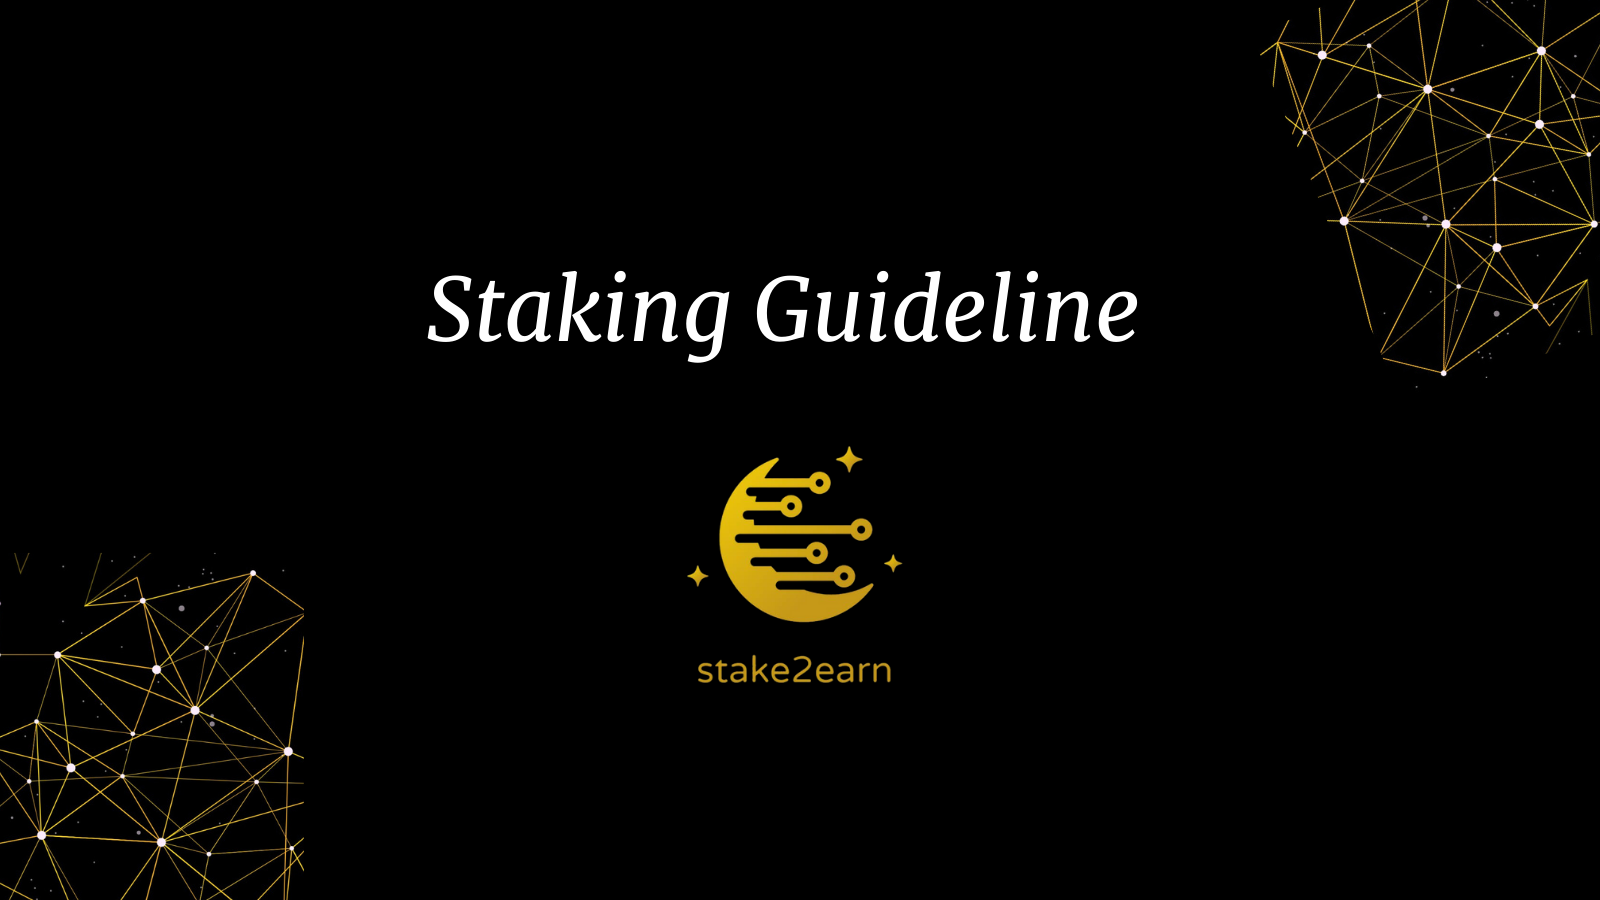 stake2earn-staking-guideline.png